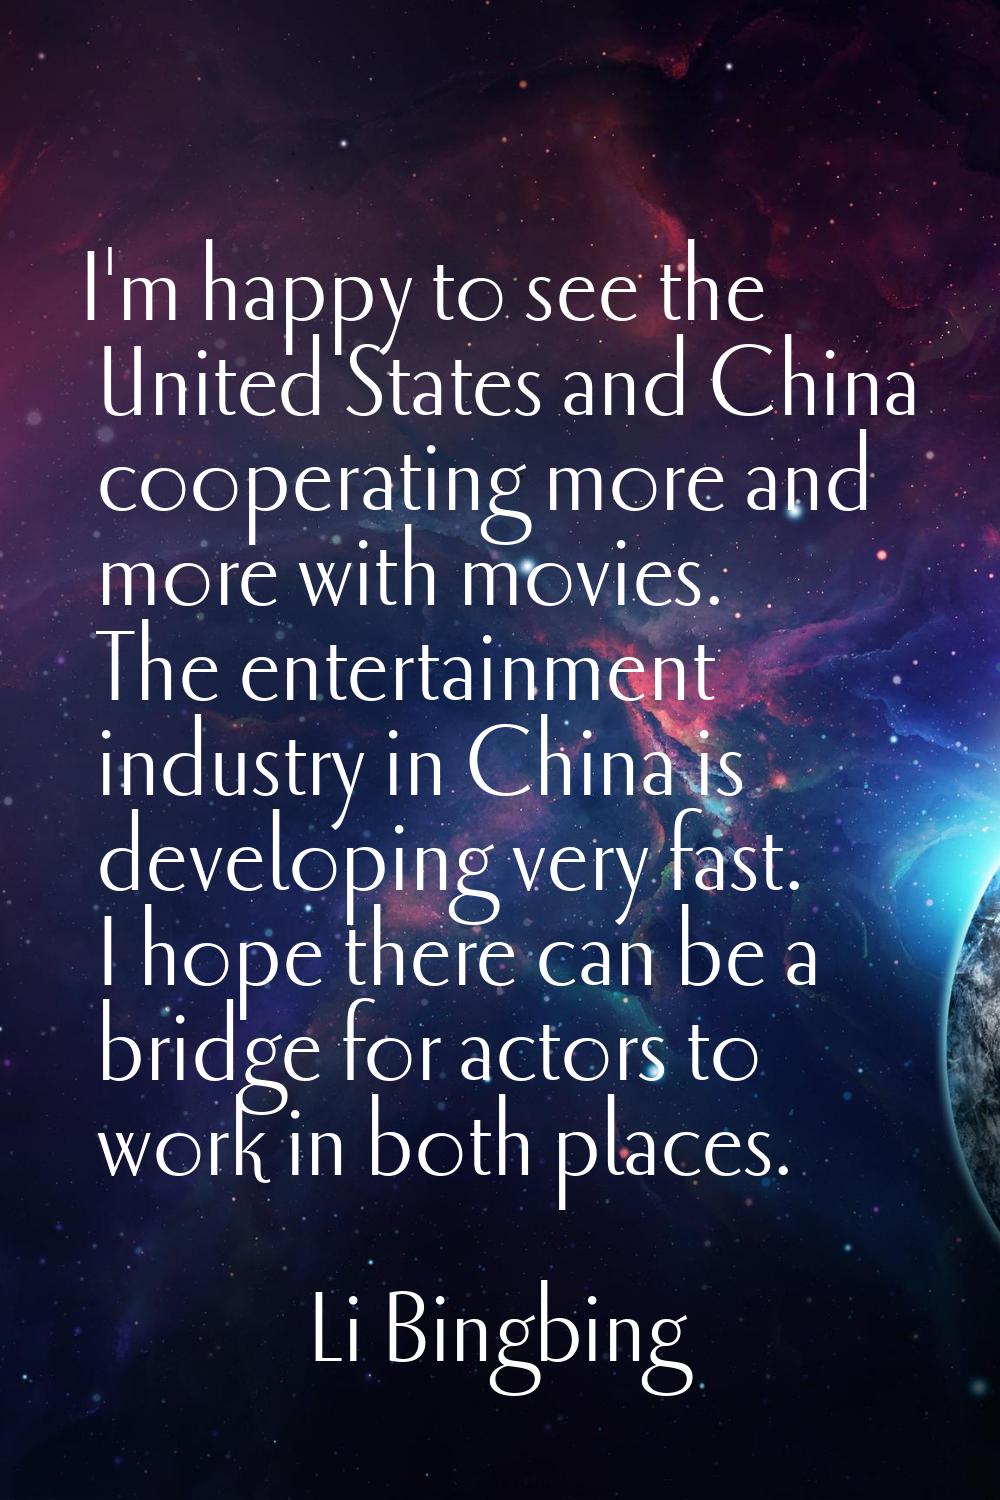 I'm happy to see the United States and China cooperating more and more with movies. The entertainme